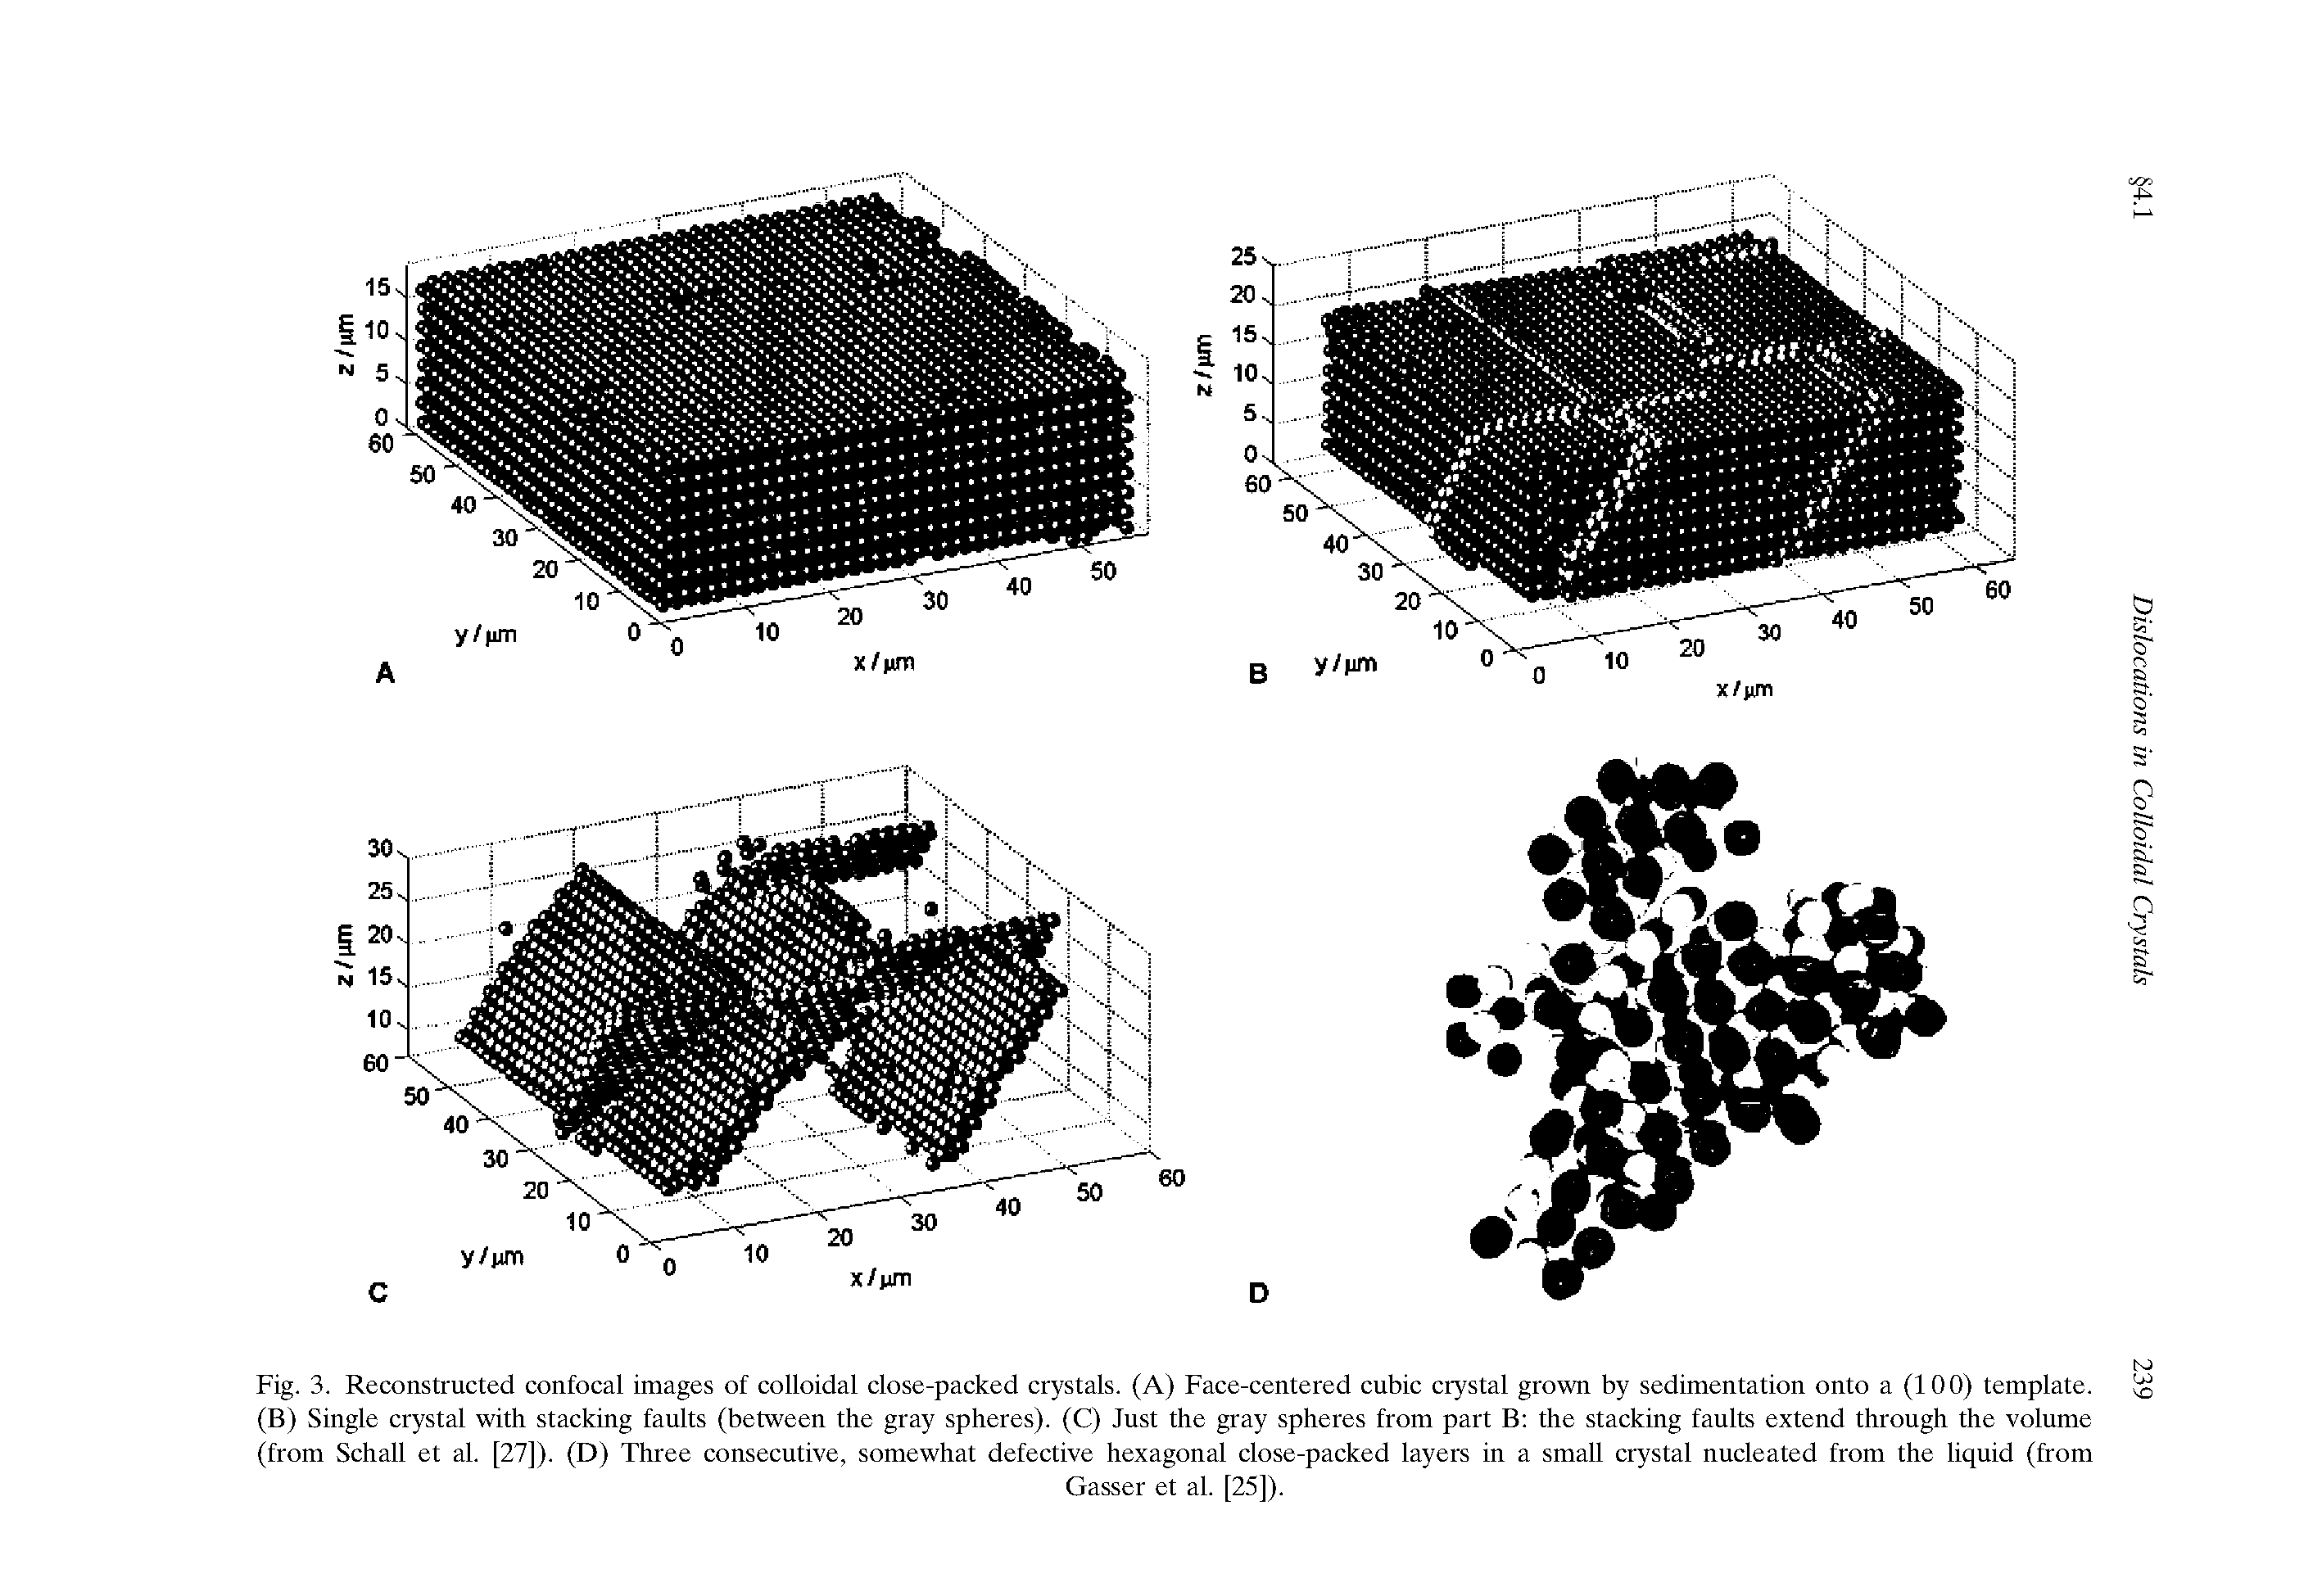 Fig. 3. Reconstructed confocal images of colloidal close-packed crystals. (A) Face-centered cubic crystal grown by sedimentation onto a (100) template. (B) Single crystal with stacking faults (between the gray spheres). (C) Just the gray spheres from part B the stacking faults extend through the volume (from Schall et al. [27]). (D) Three consecutive, somewhat defective hexagonal close-packed layers in a small crystal nucleated from the liquid (from...